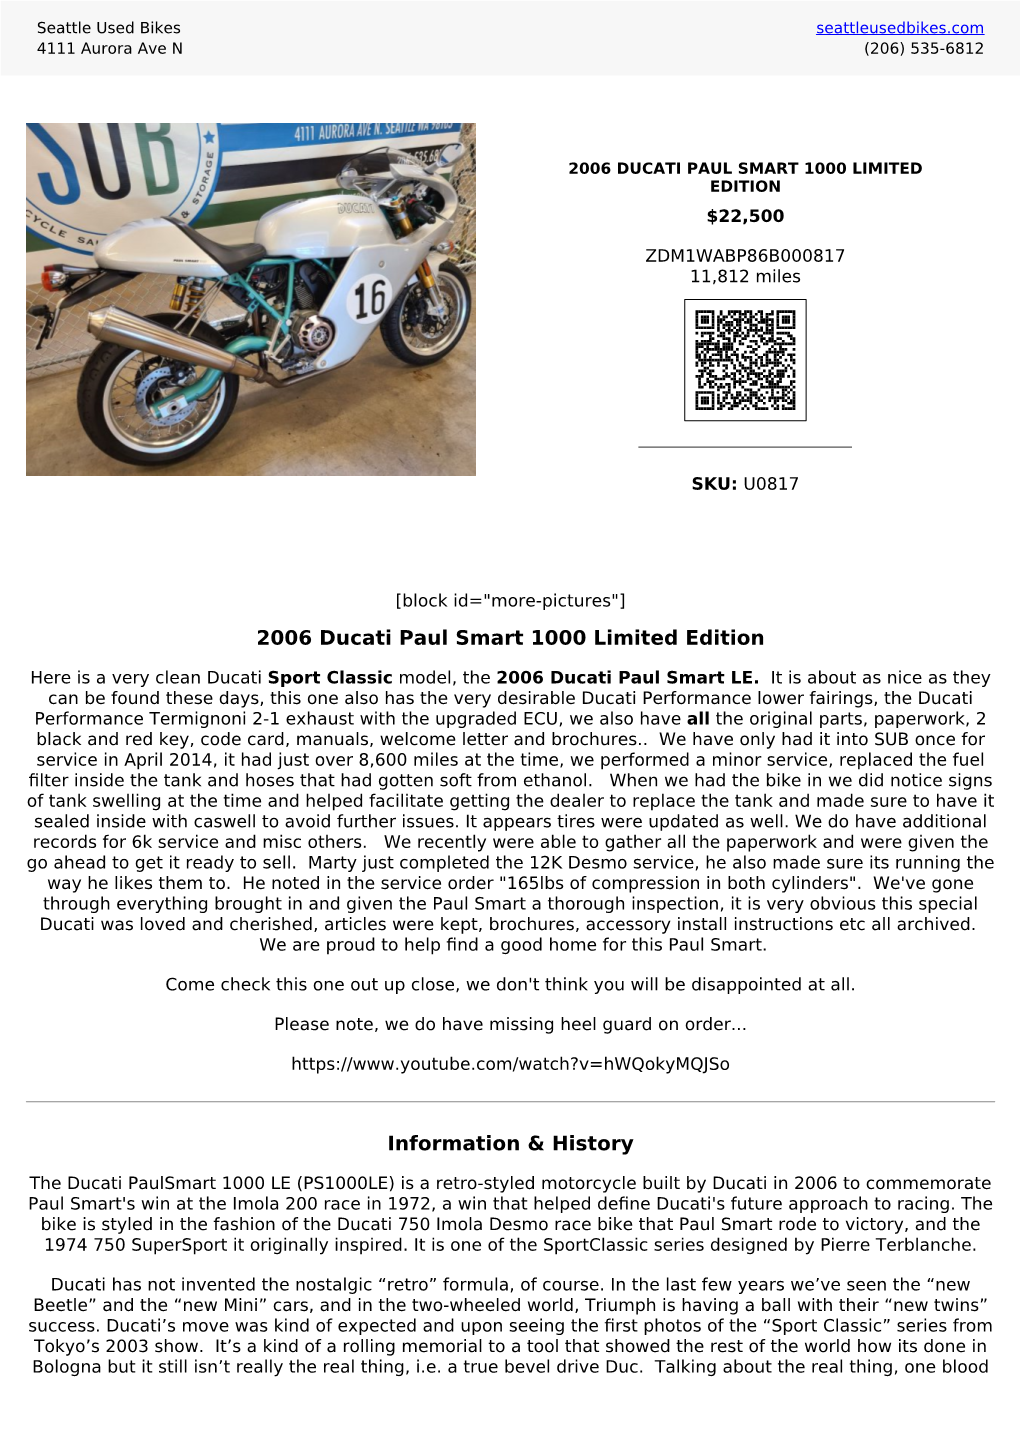 2006 Ducati Paul Smart 1000 Limited Edition Information & History